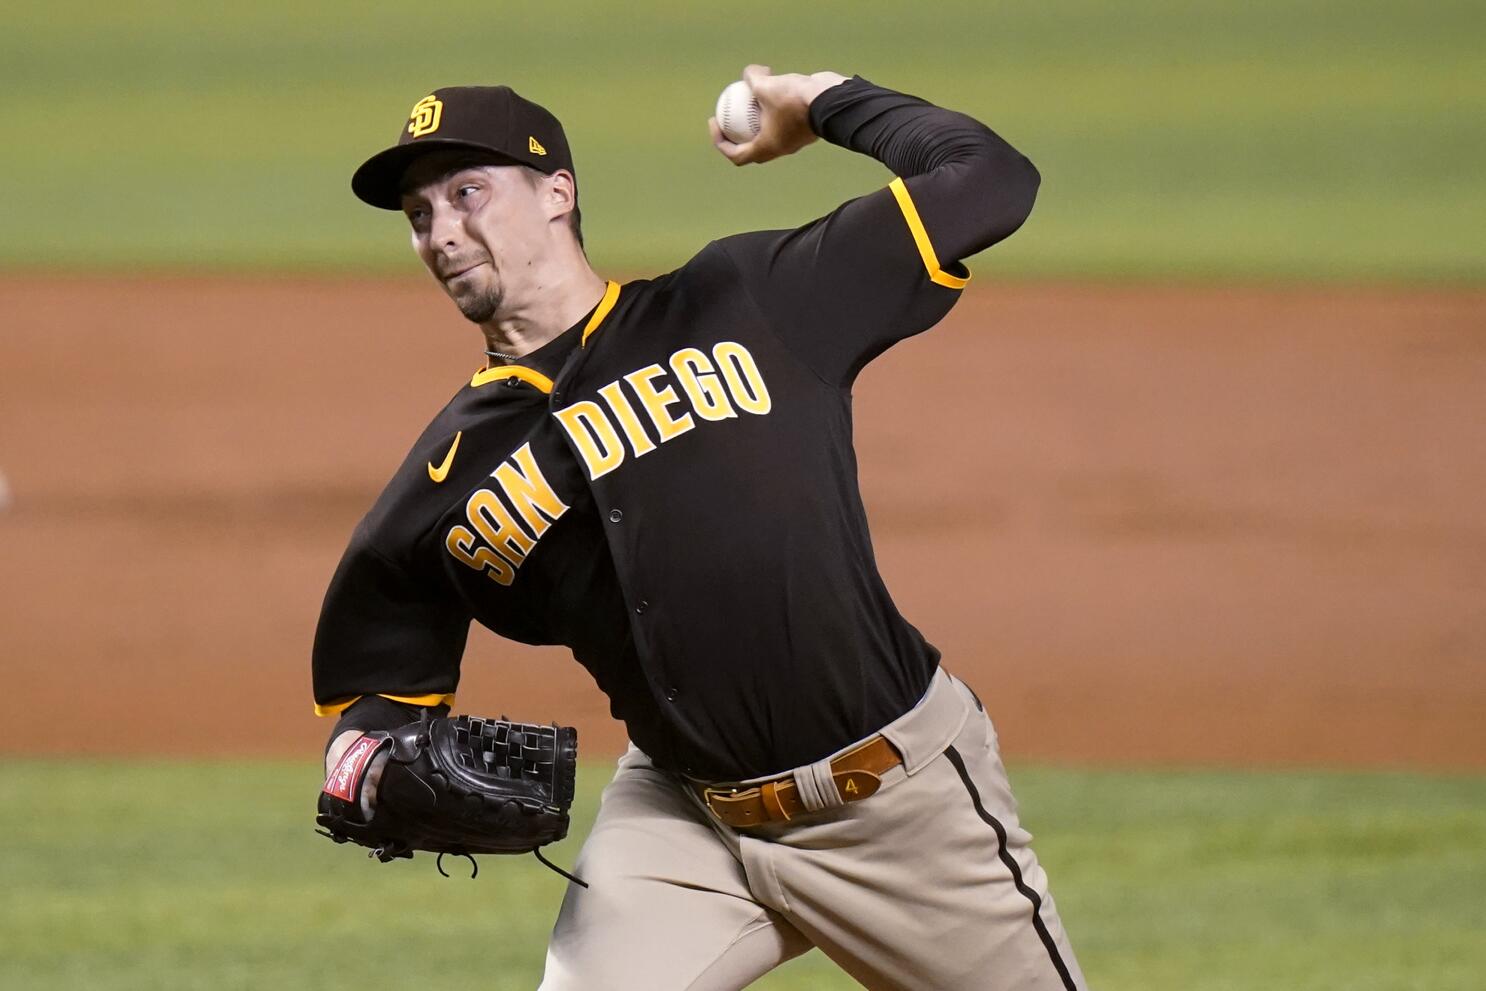 Left-hander Blake Snell's contract with the San Diego Padres